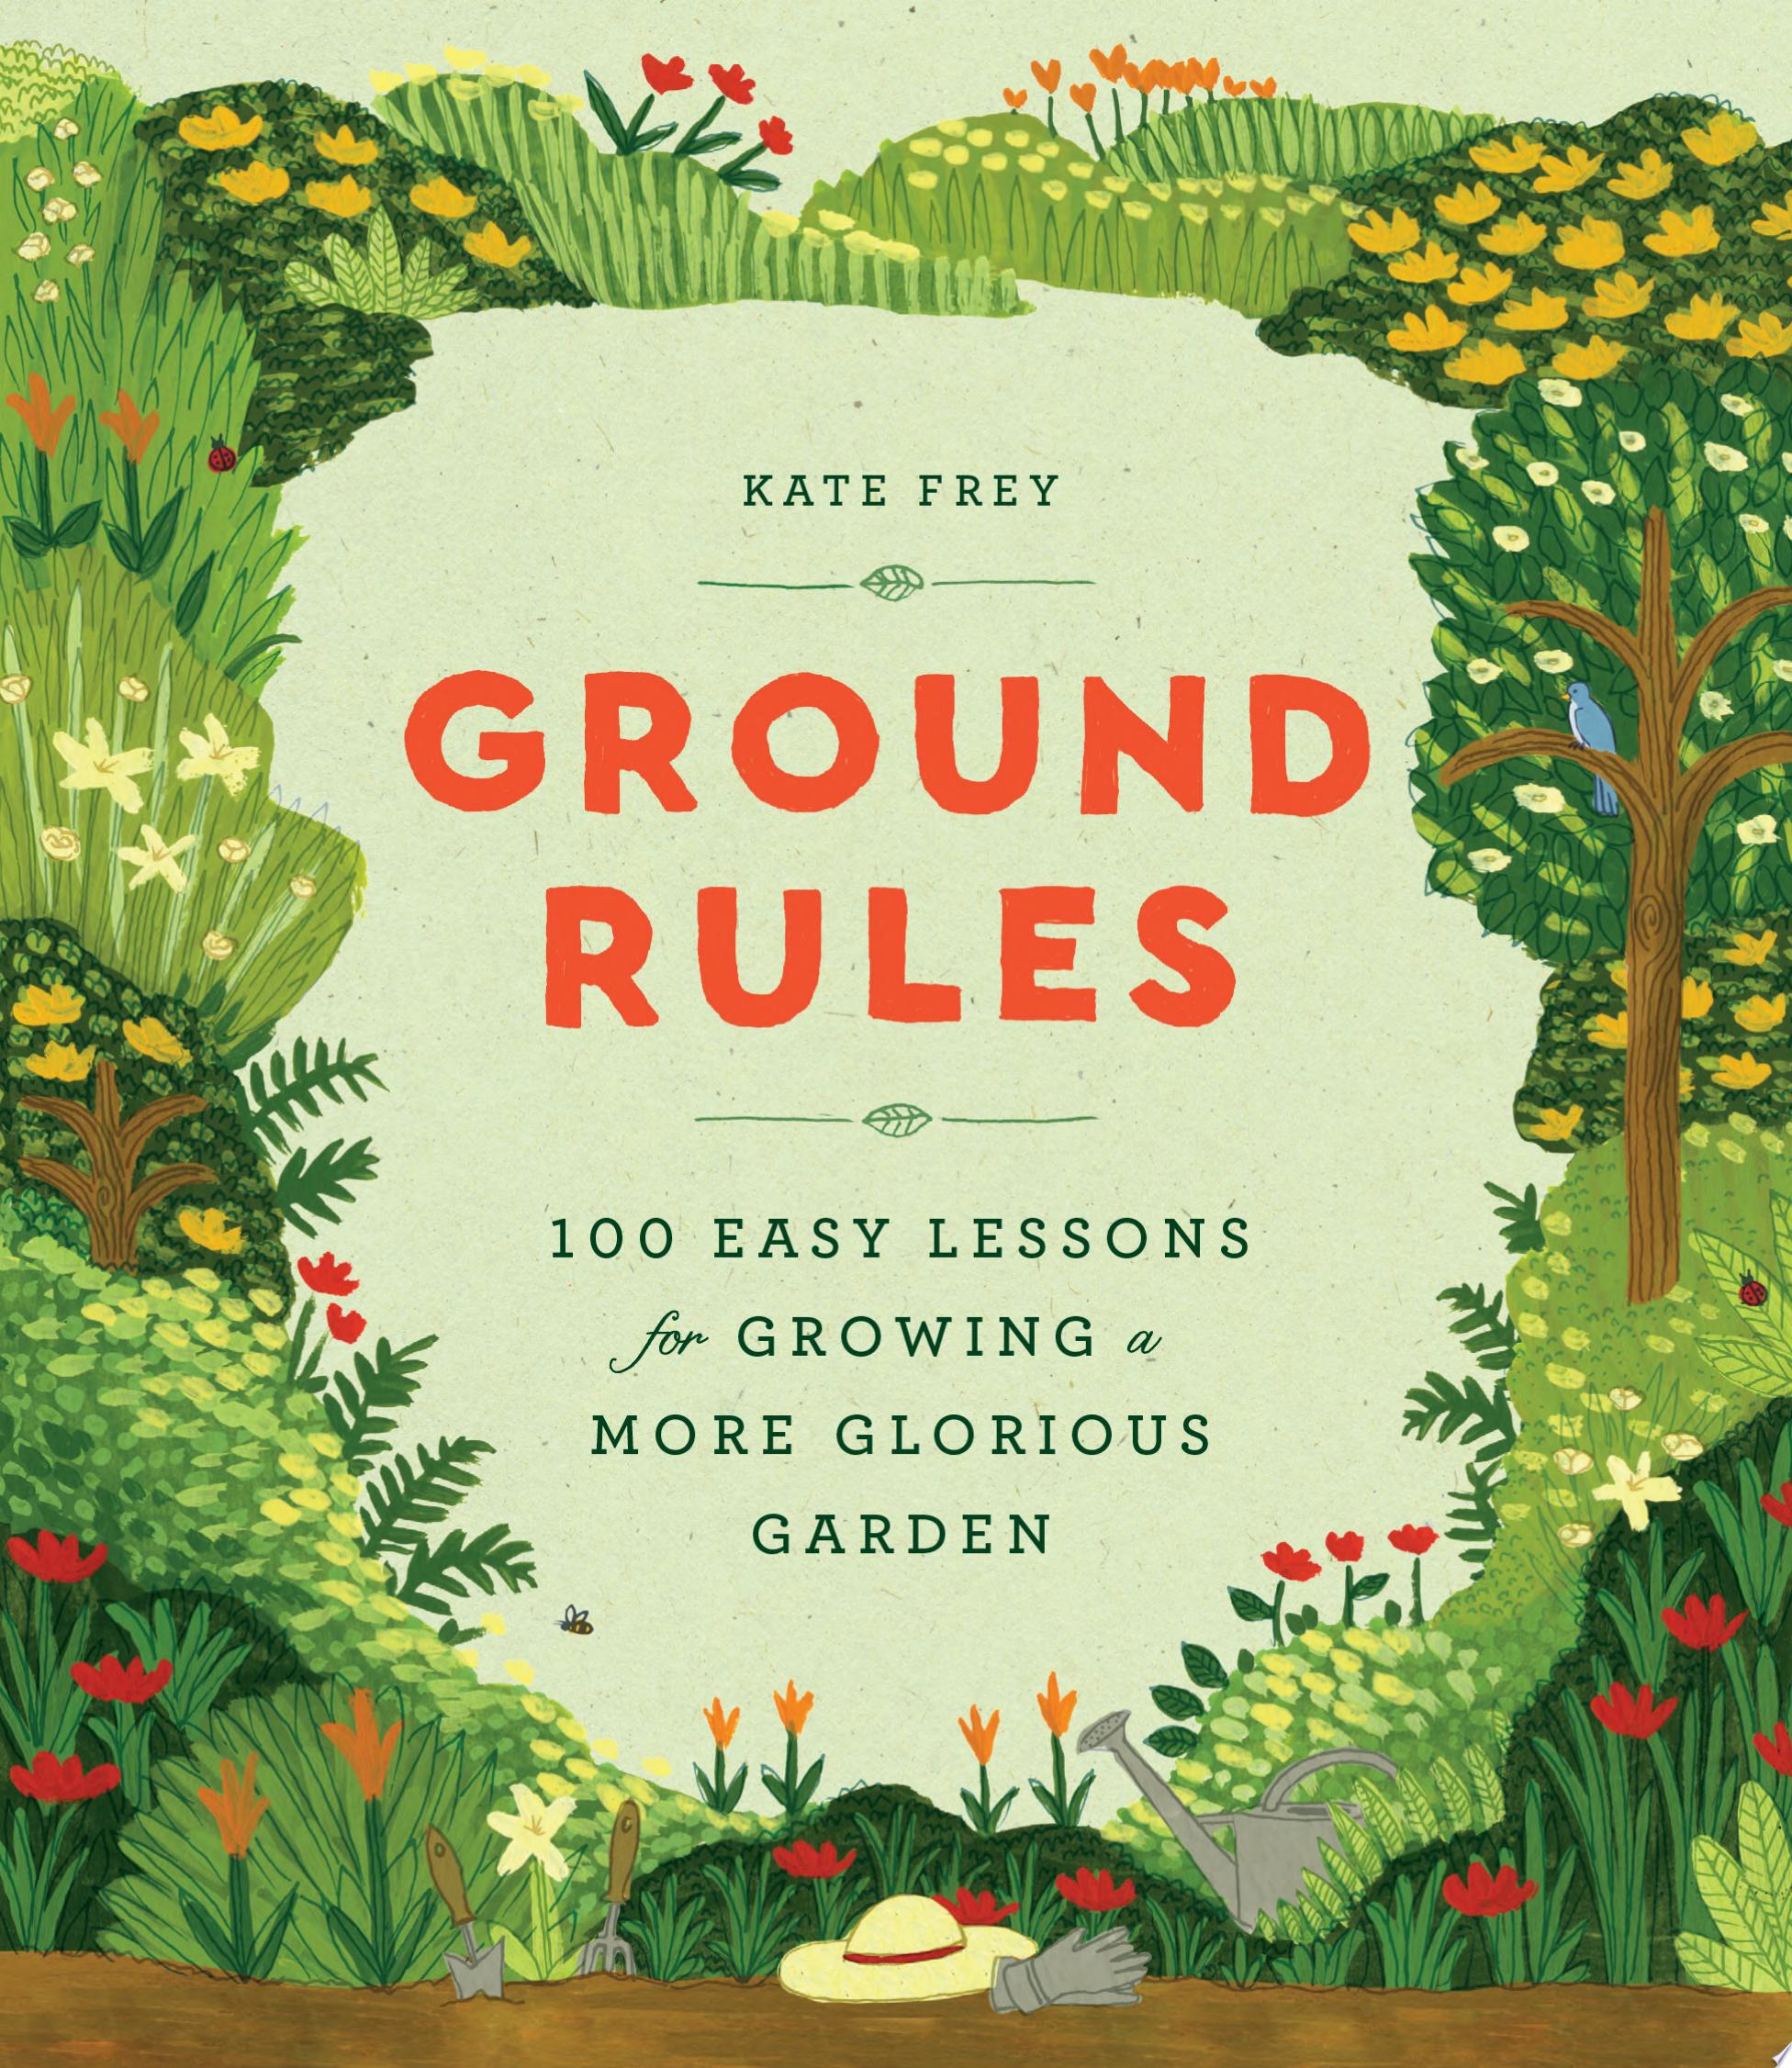 Image for "Ground Rules"